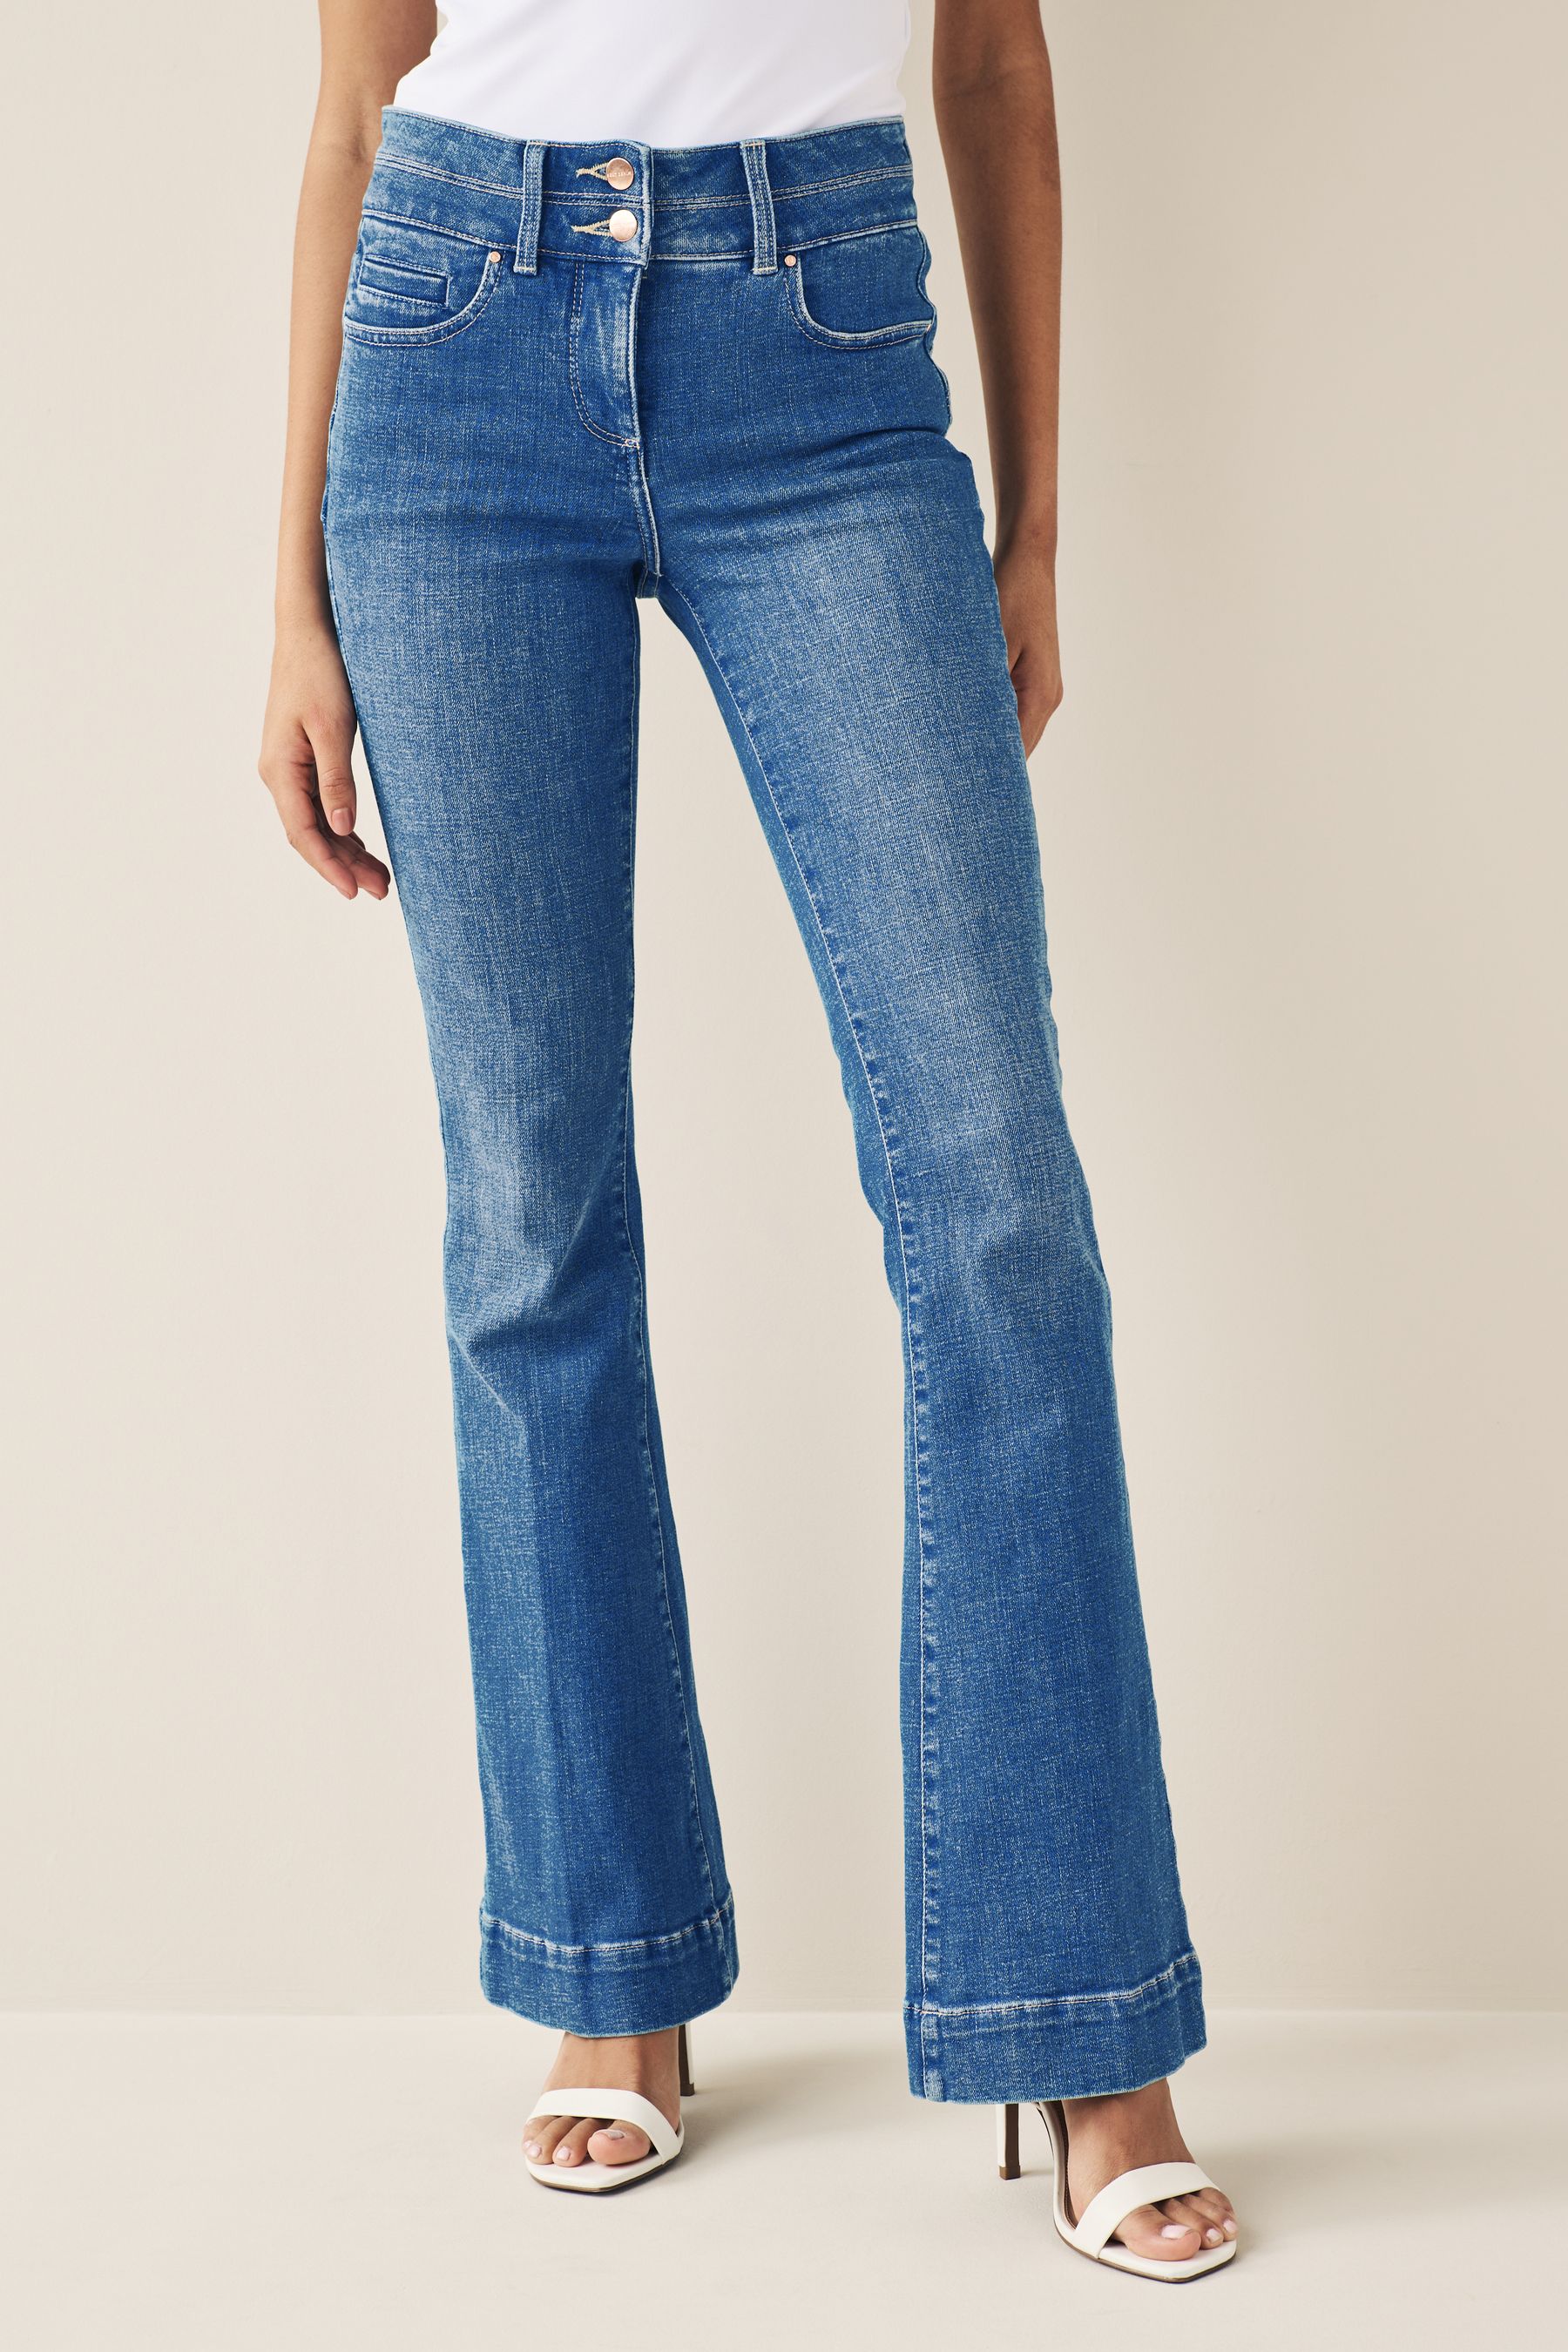 Buy Dark Blue Lift Slim And Shape Flare Jeans from the Next UK online shop